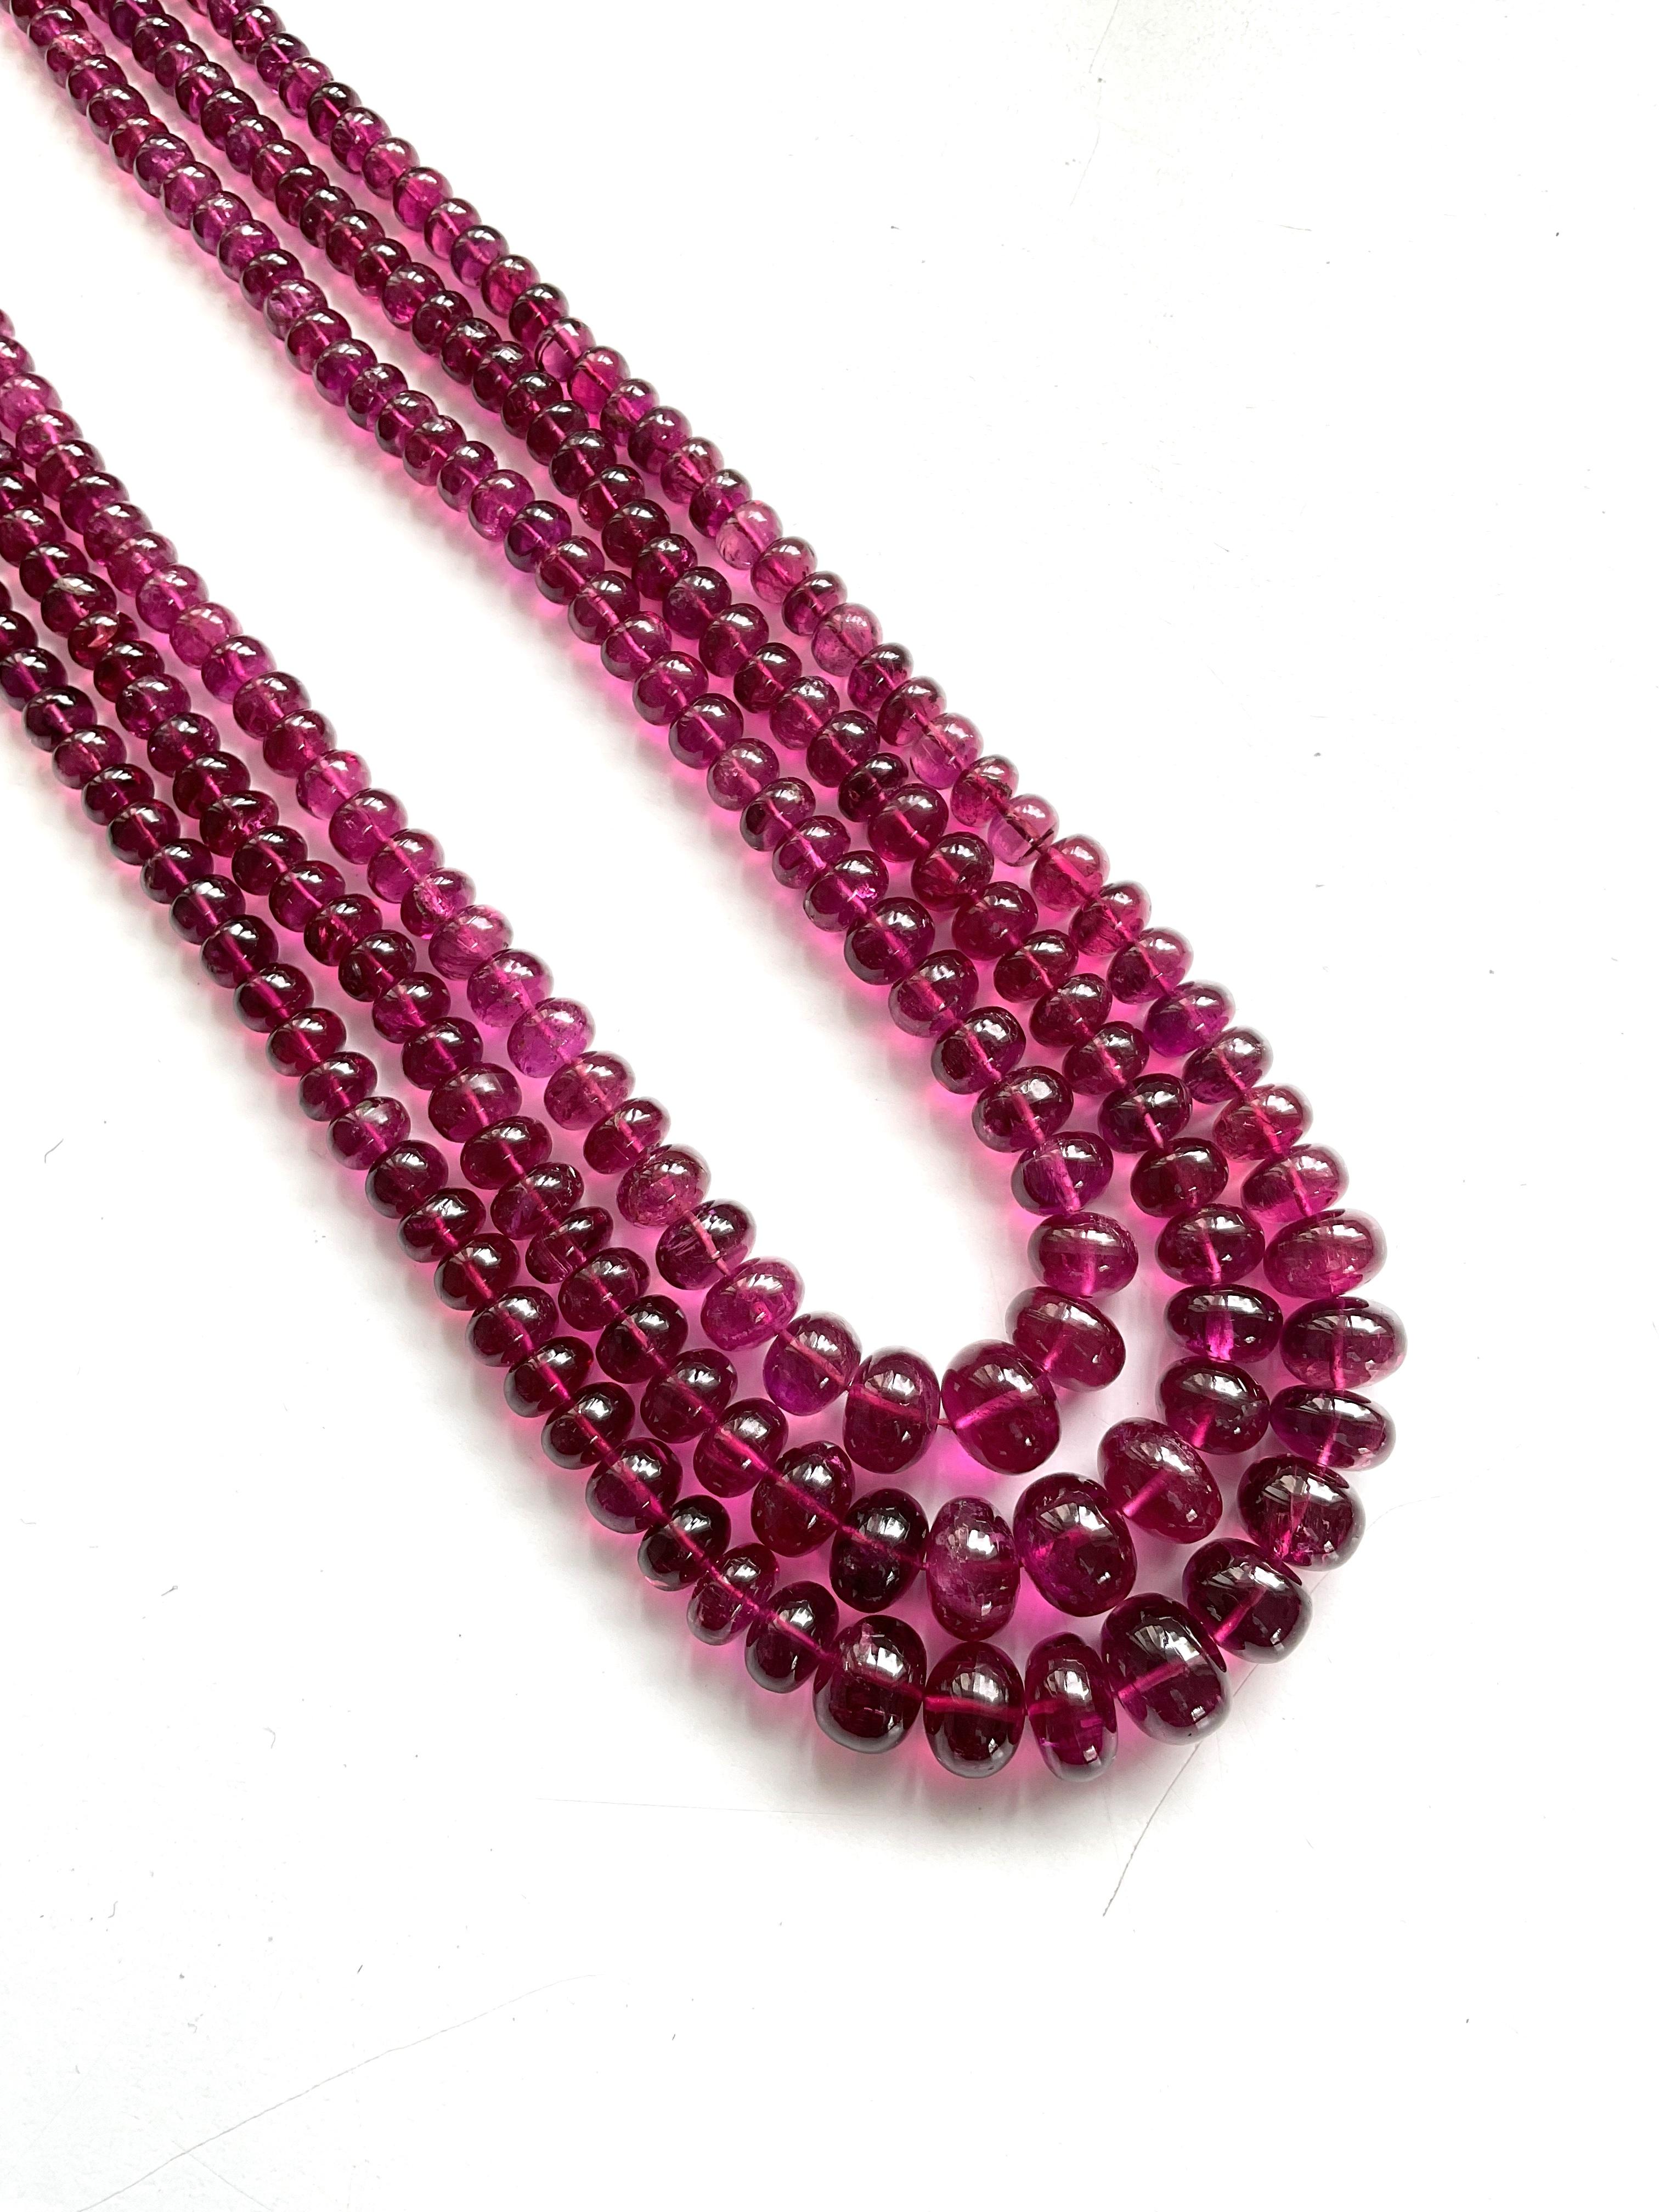 This is a one of a kind of rubellite tourmaline.
Gemstone - Rubellite Tourmaline
Weight -  510.00 Carats
Strand - 3
Shape -Beads

